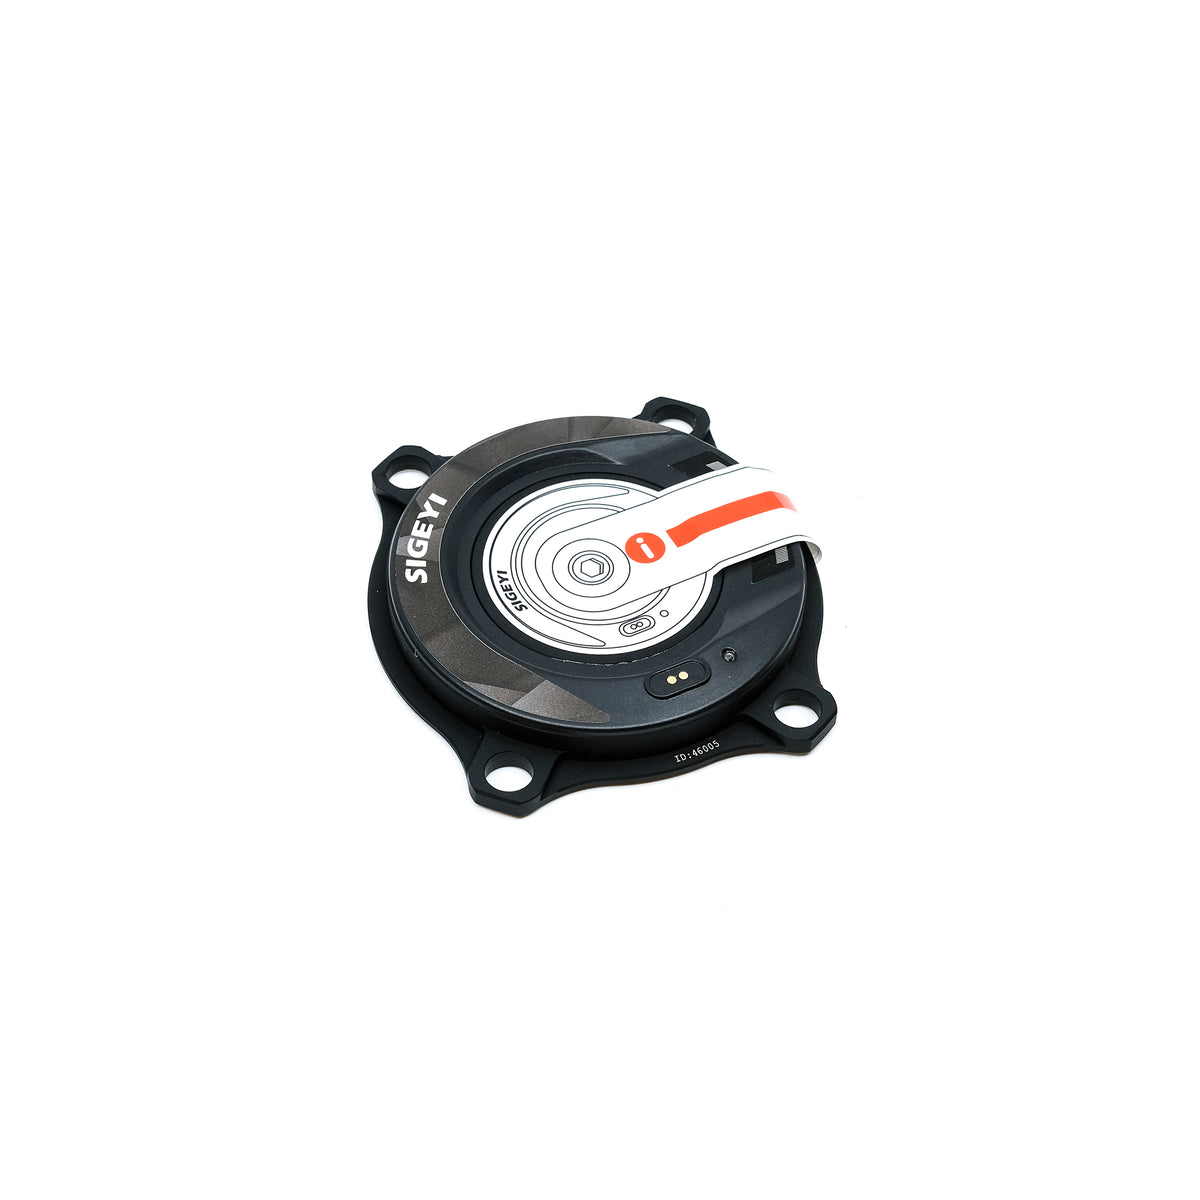 SIGEYI AXO Power Meter Spider for Rotor Aldhu